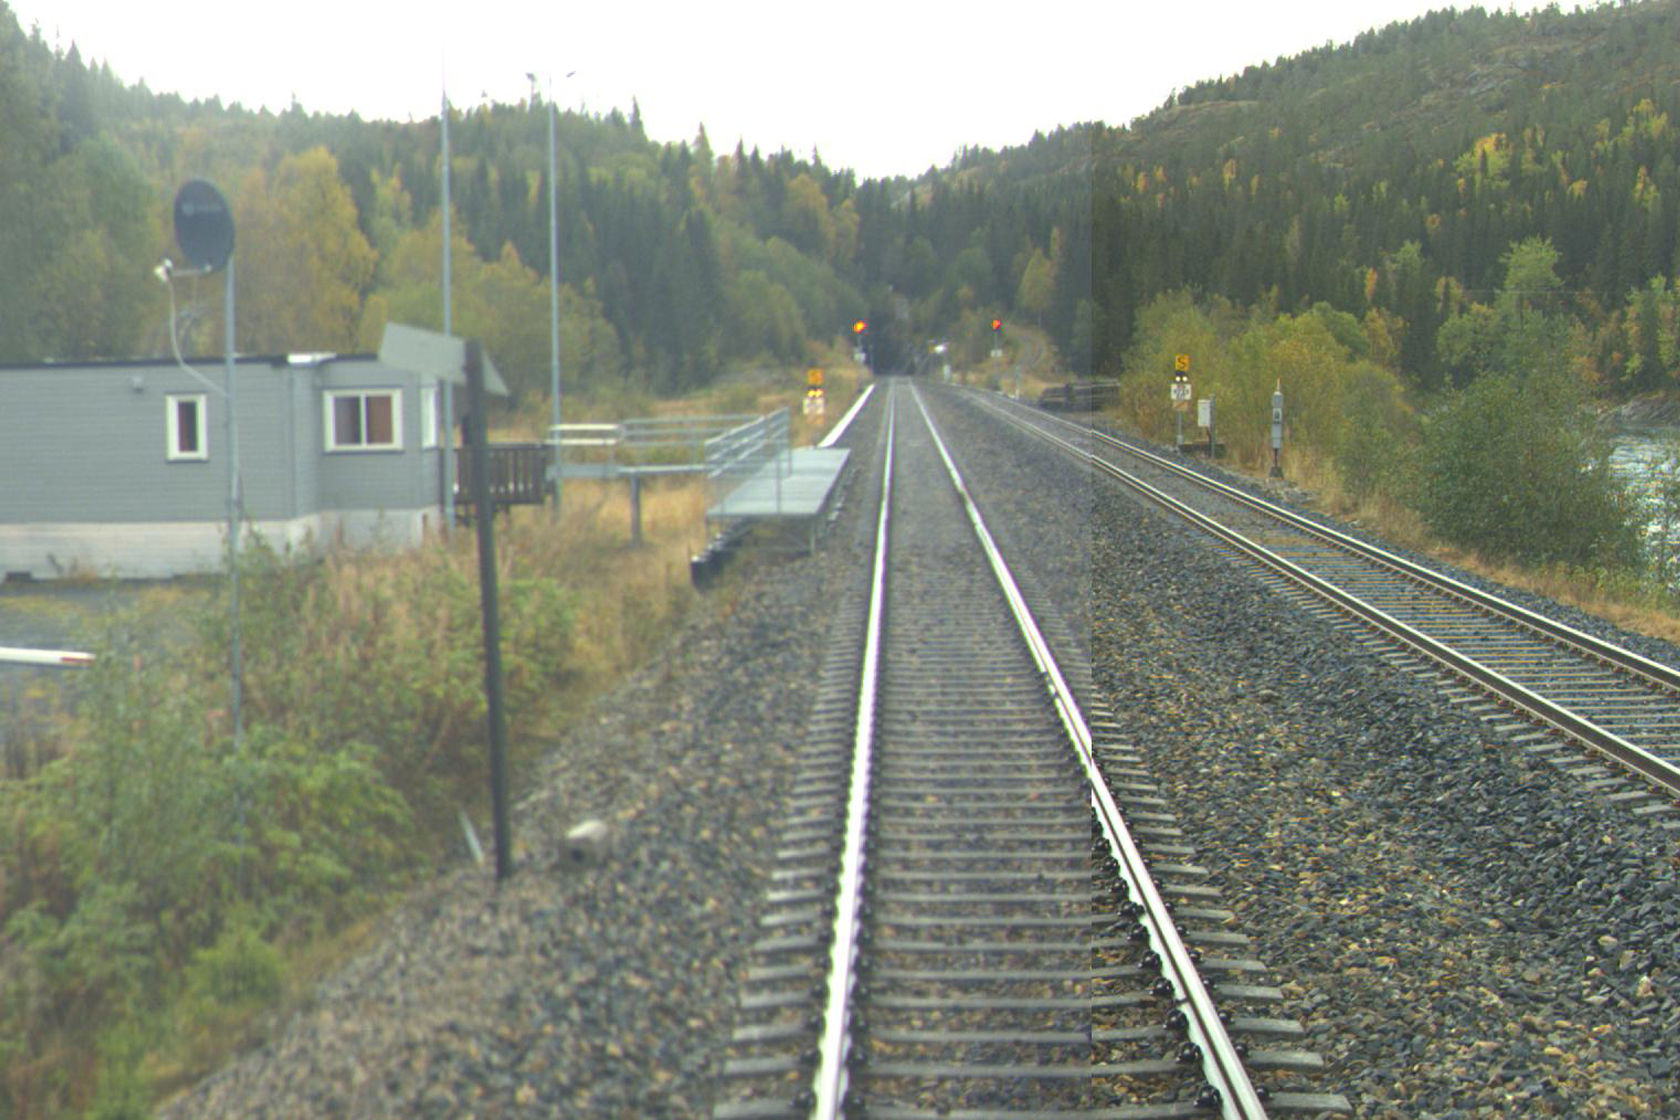 Tracks and building at Eiterstraum station